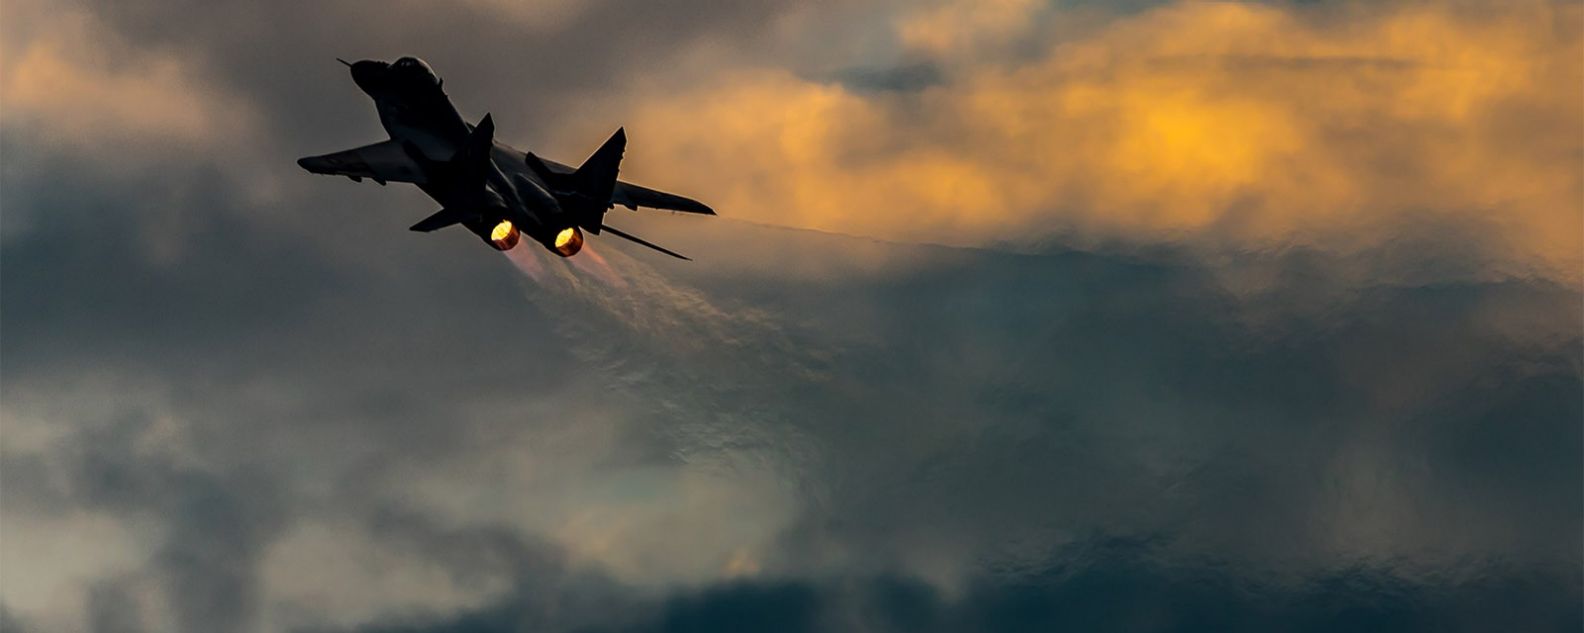 Polish Air Force MiG 29 Fulcrum fighter jet taking off at dawn